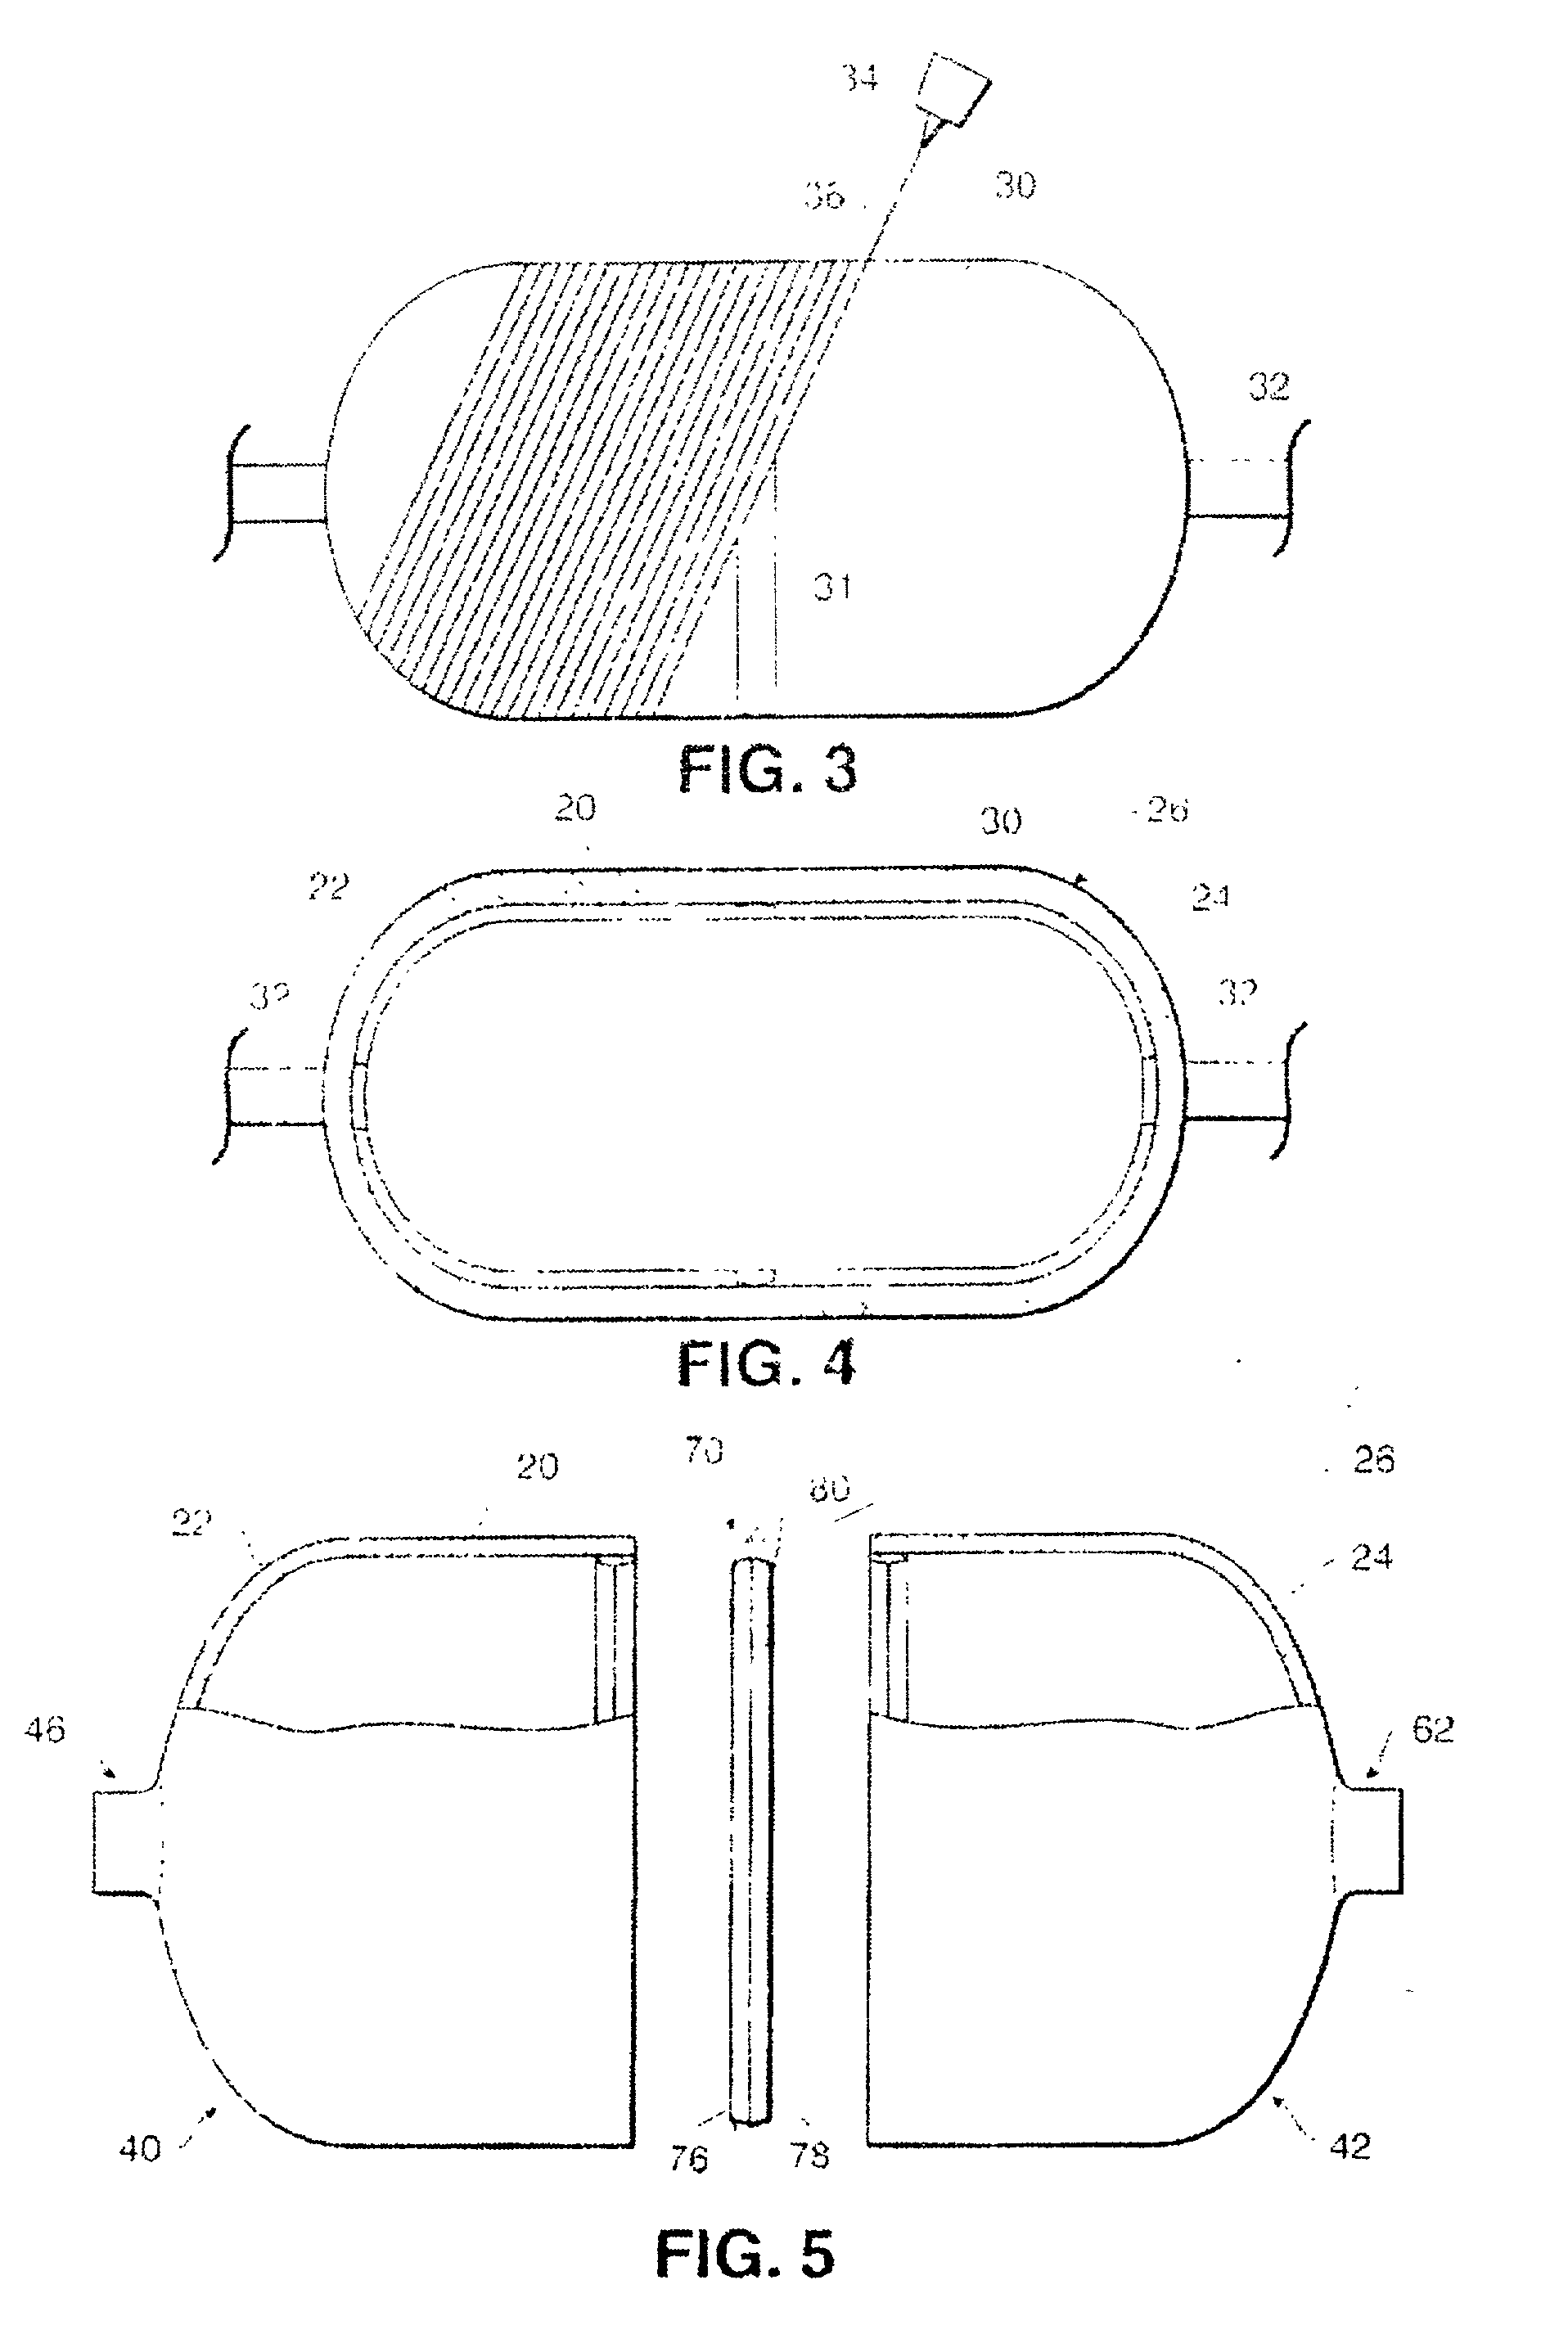 Low weight high performance composite vessel and method of making same